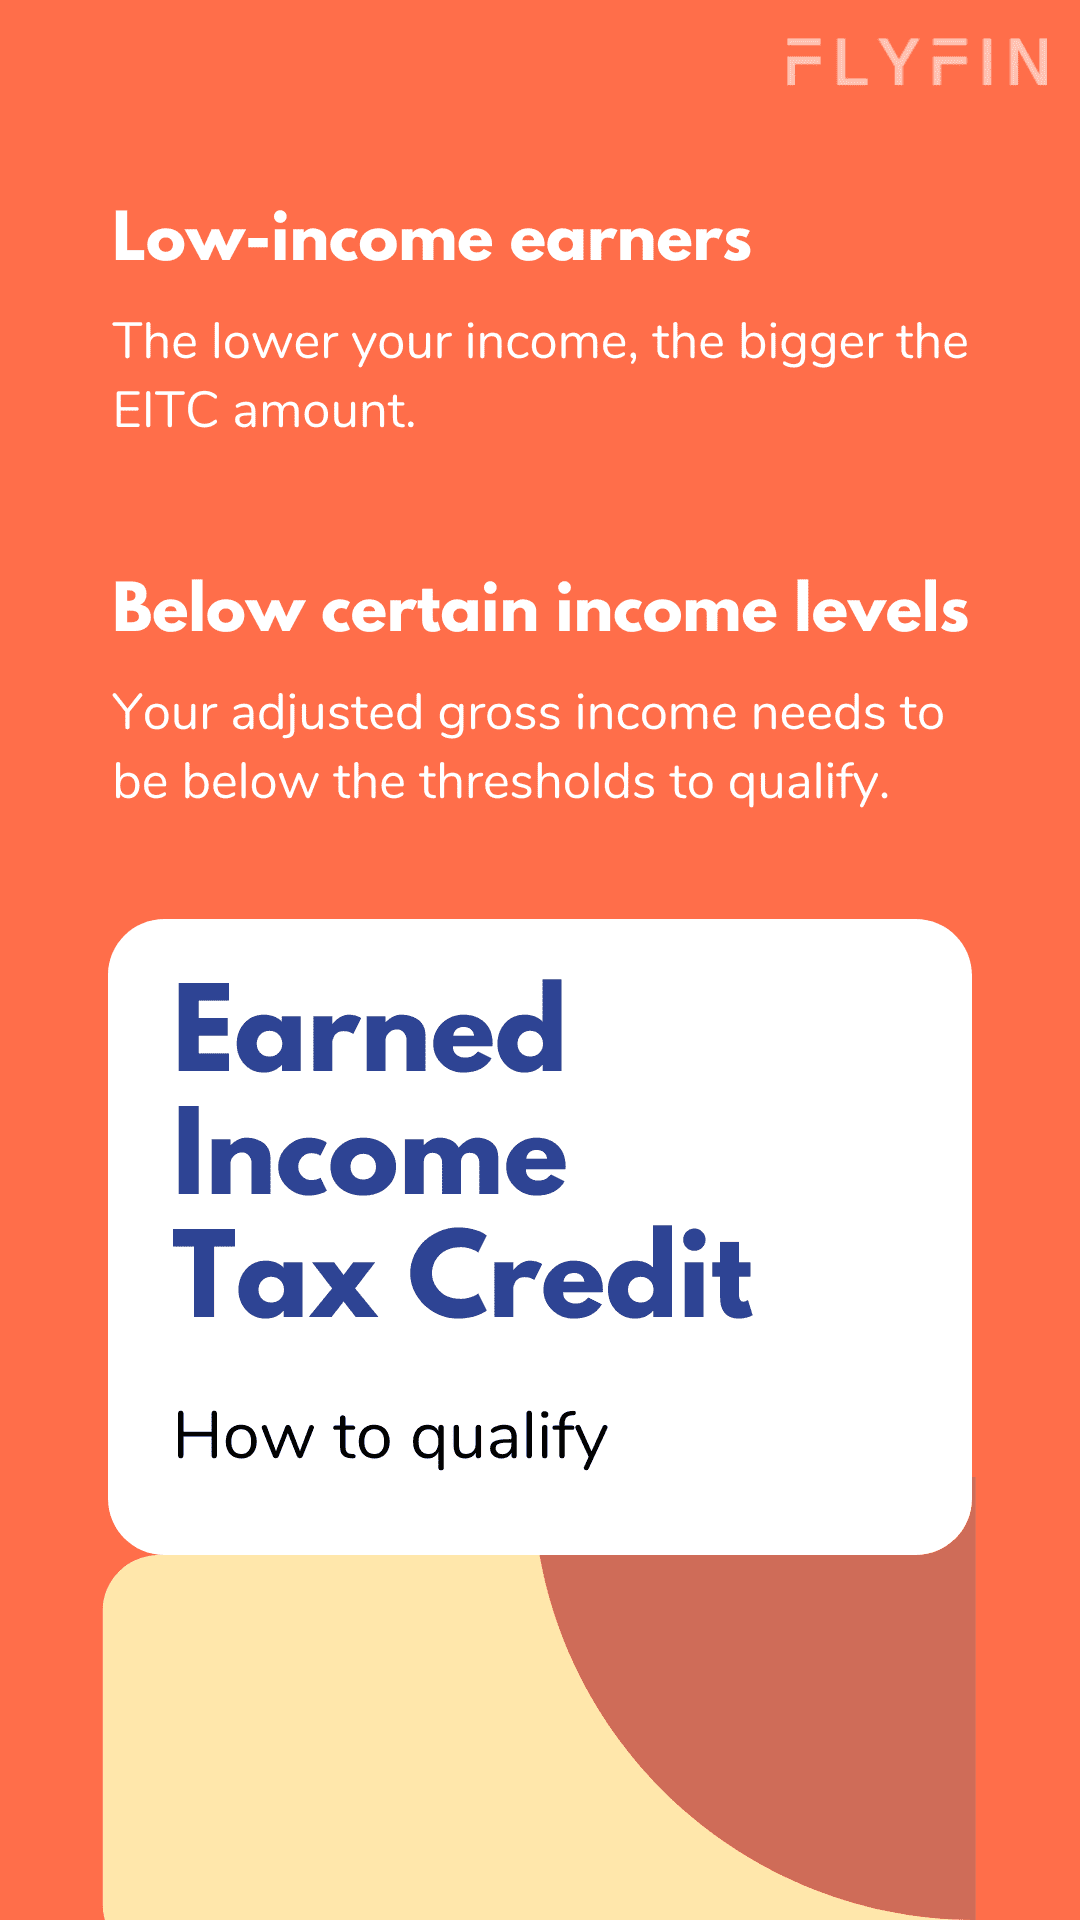 Who Qualifies for the Earned Income Credit?